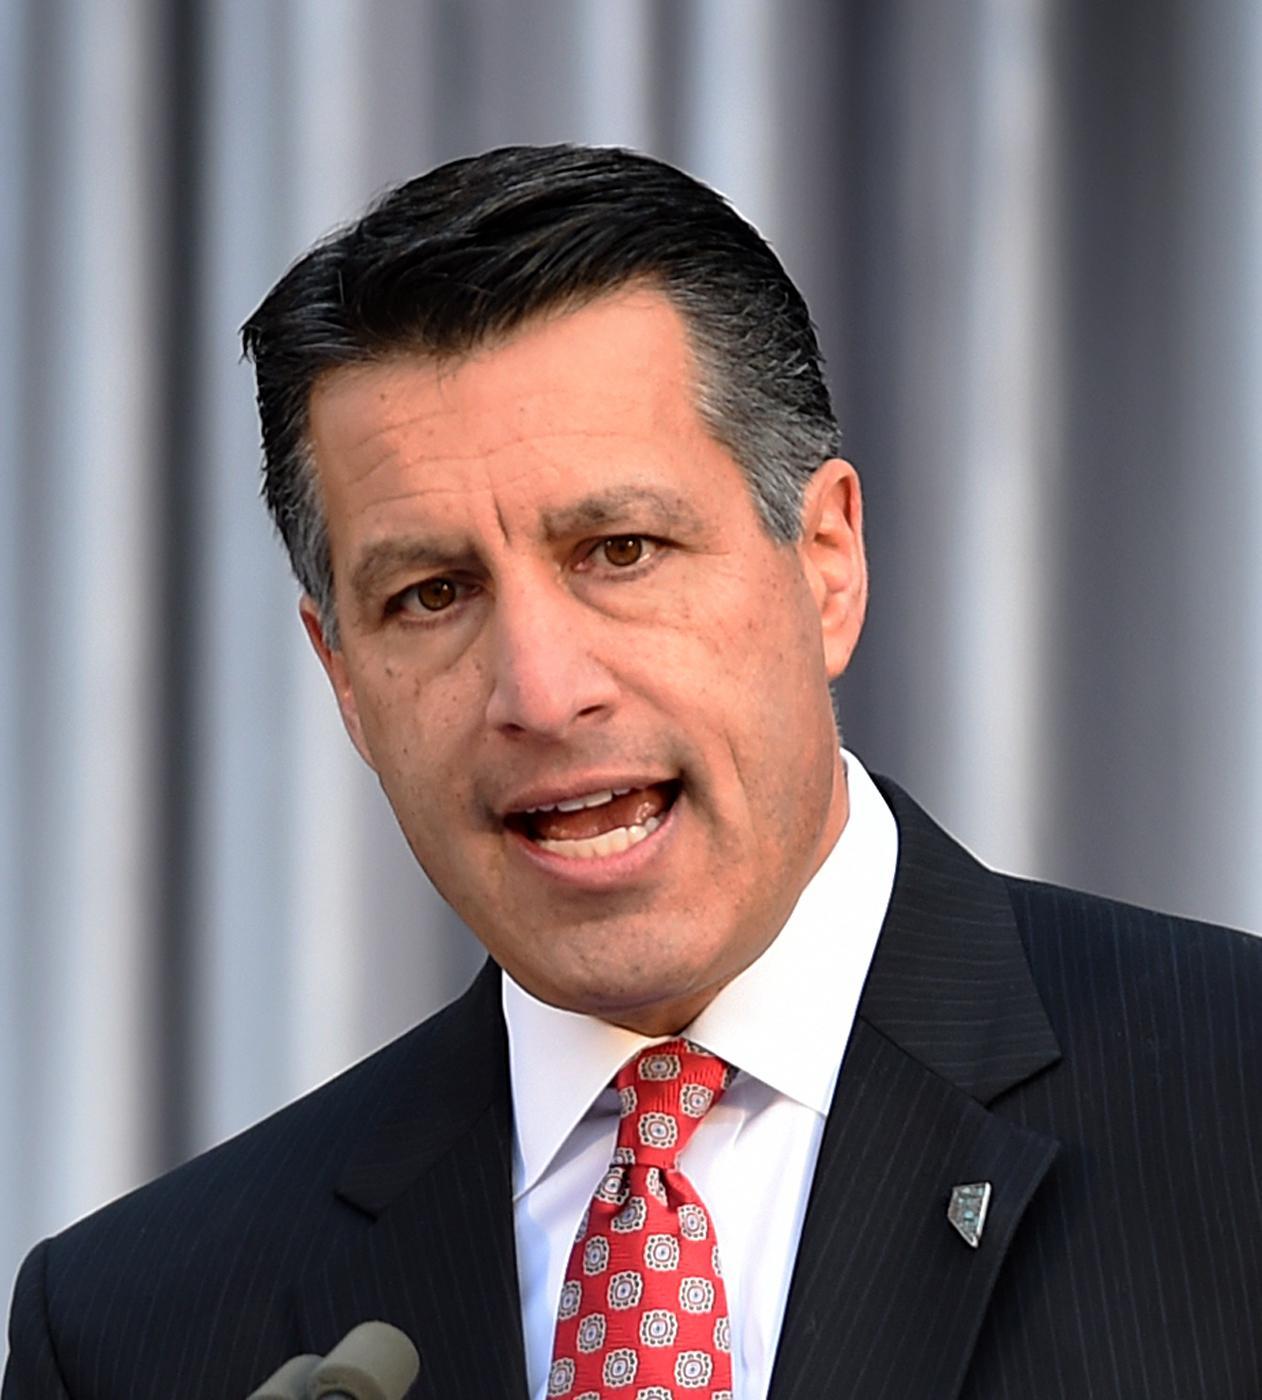 What we could see in Sandoval's final state of the state